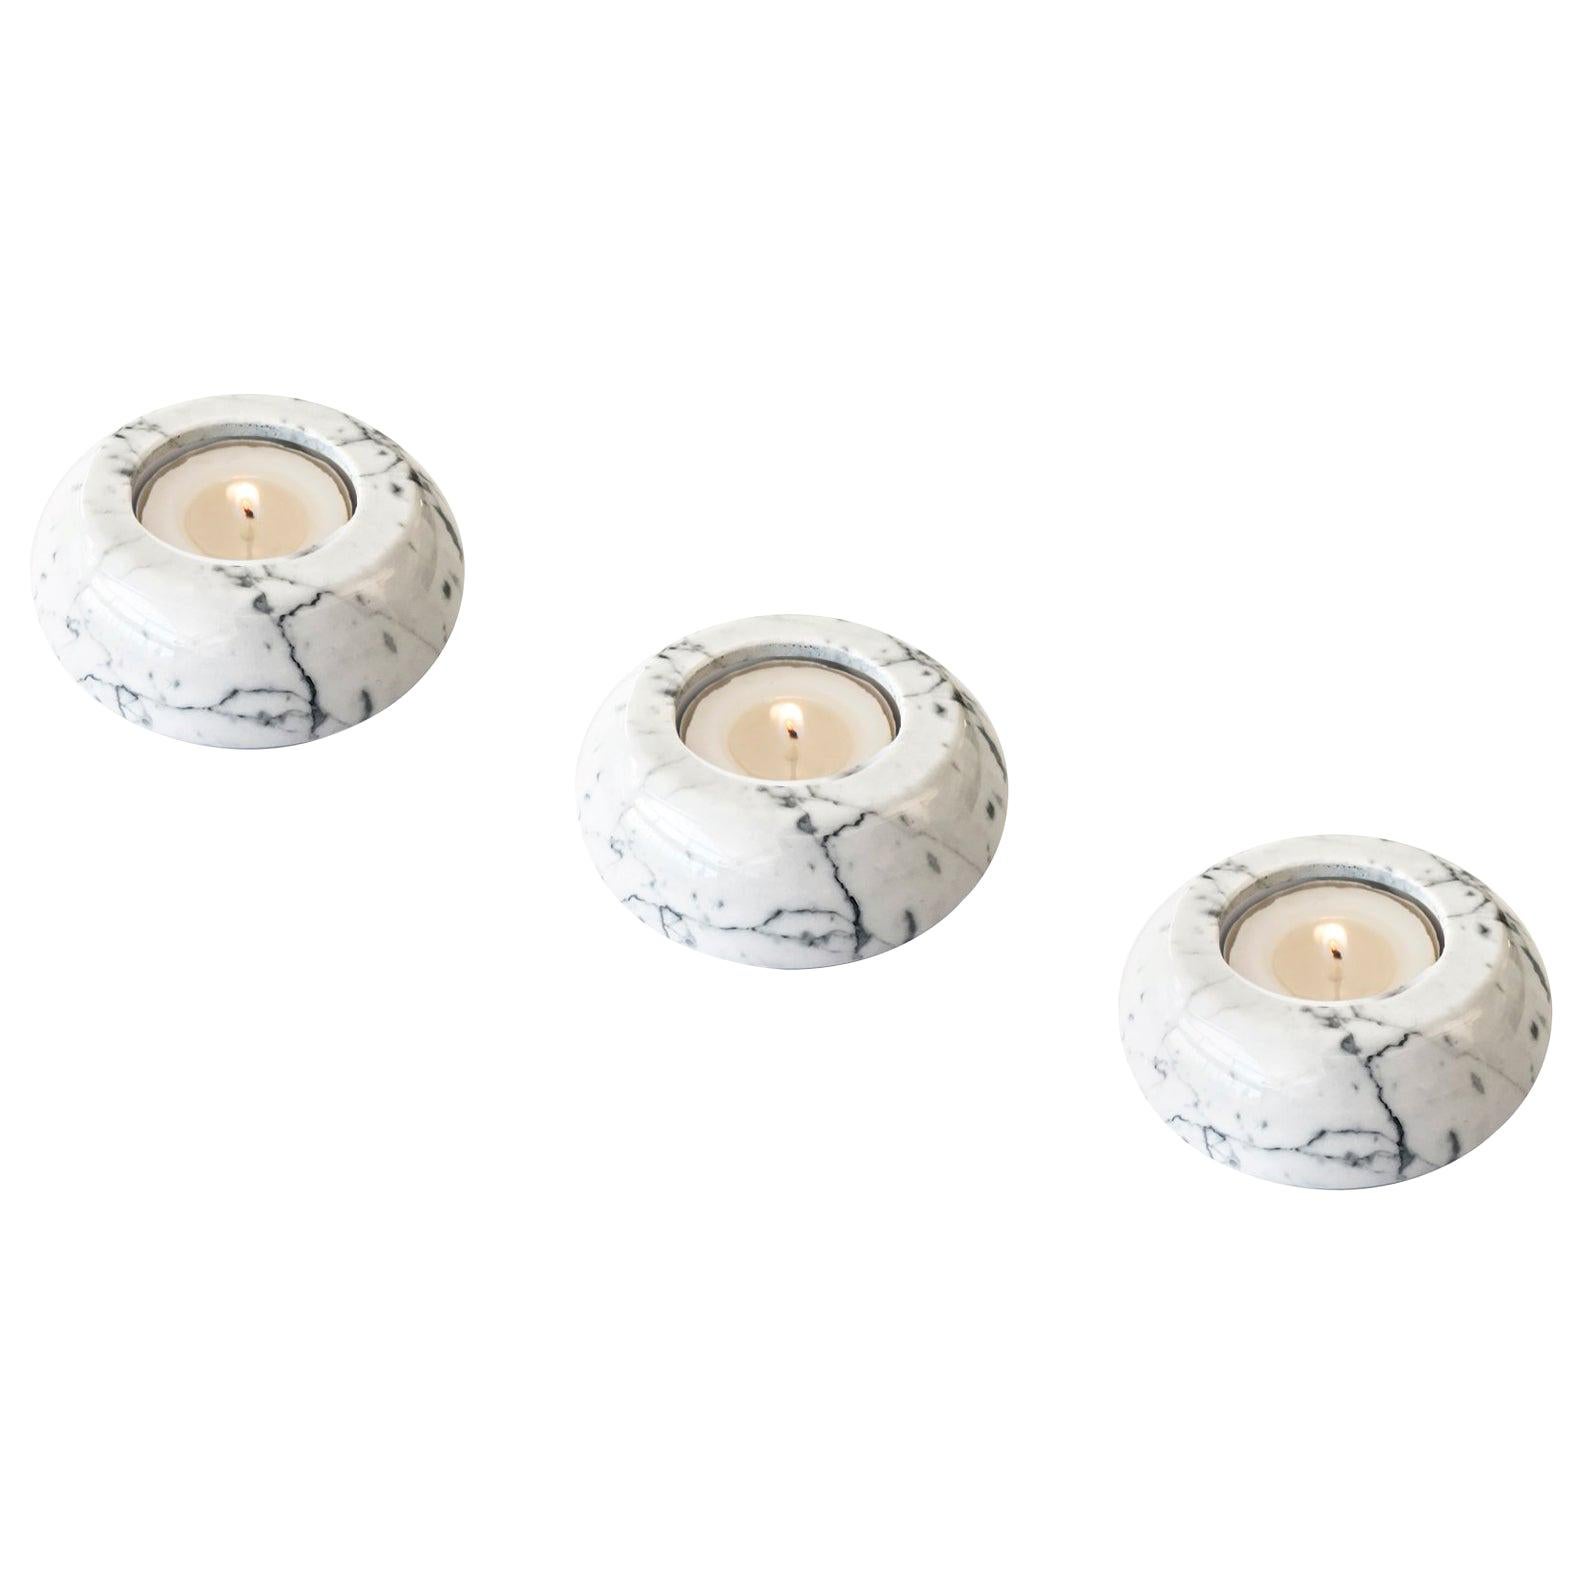 Set of 3 Candleholders in White Carrara Marble